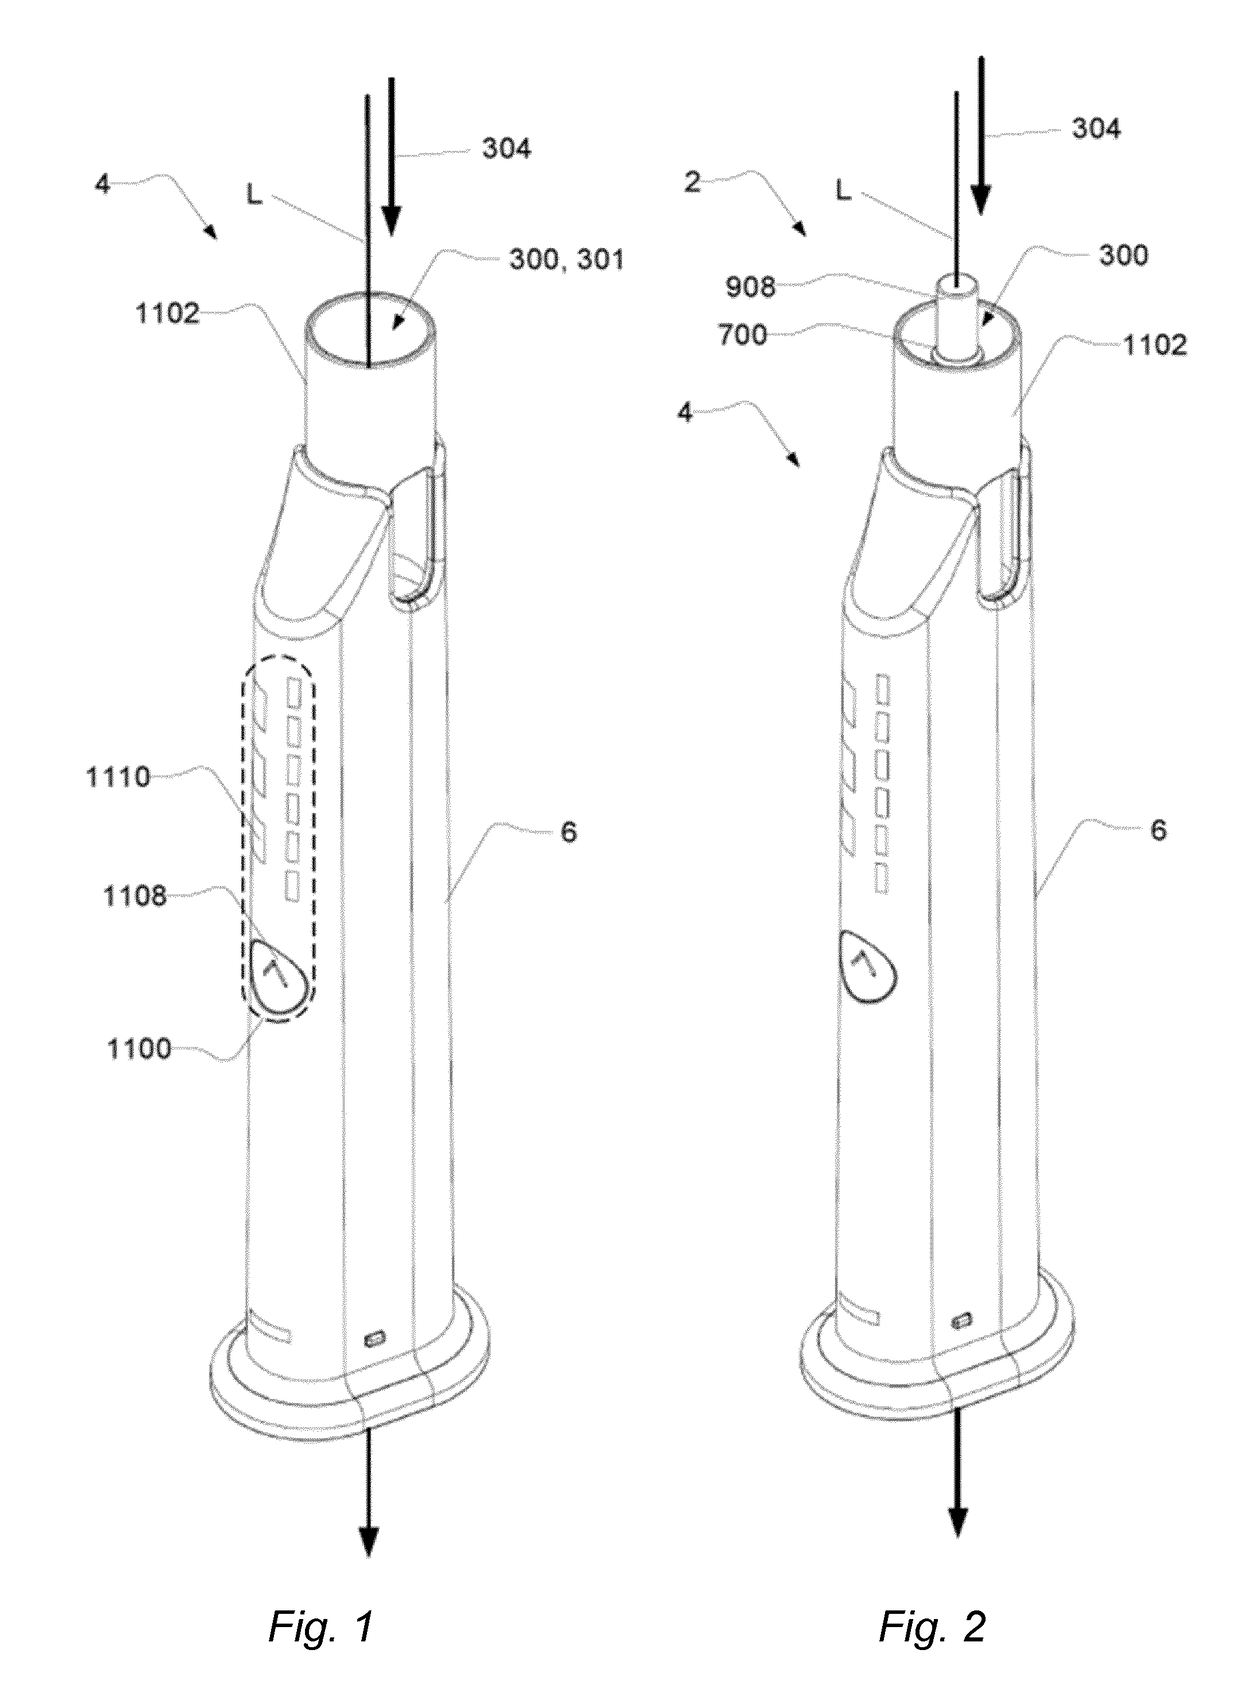 Auto injector with cartridge retention system